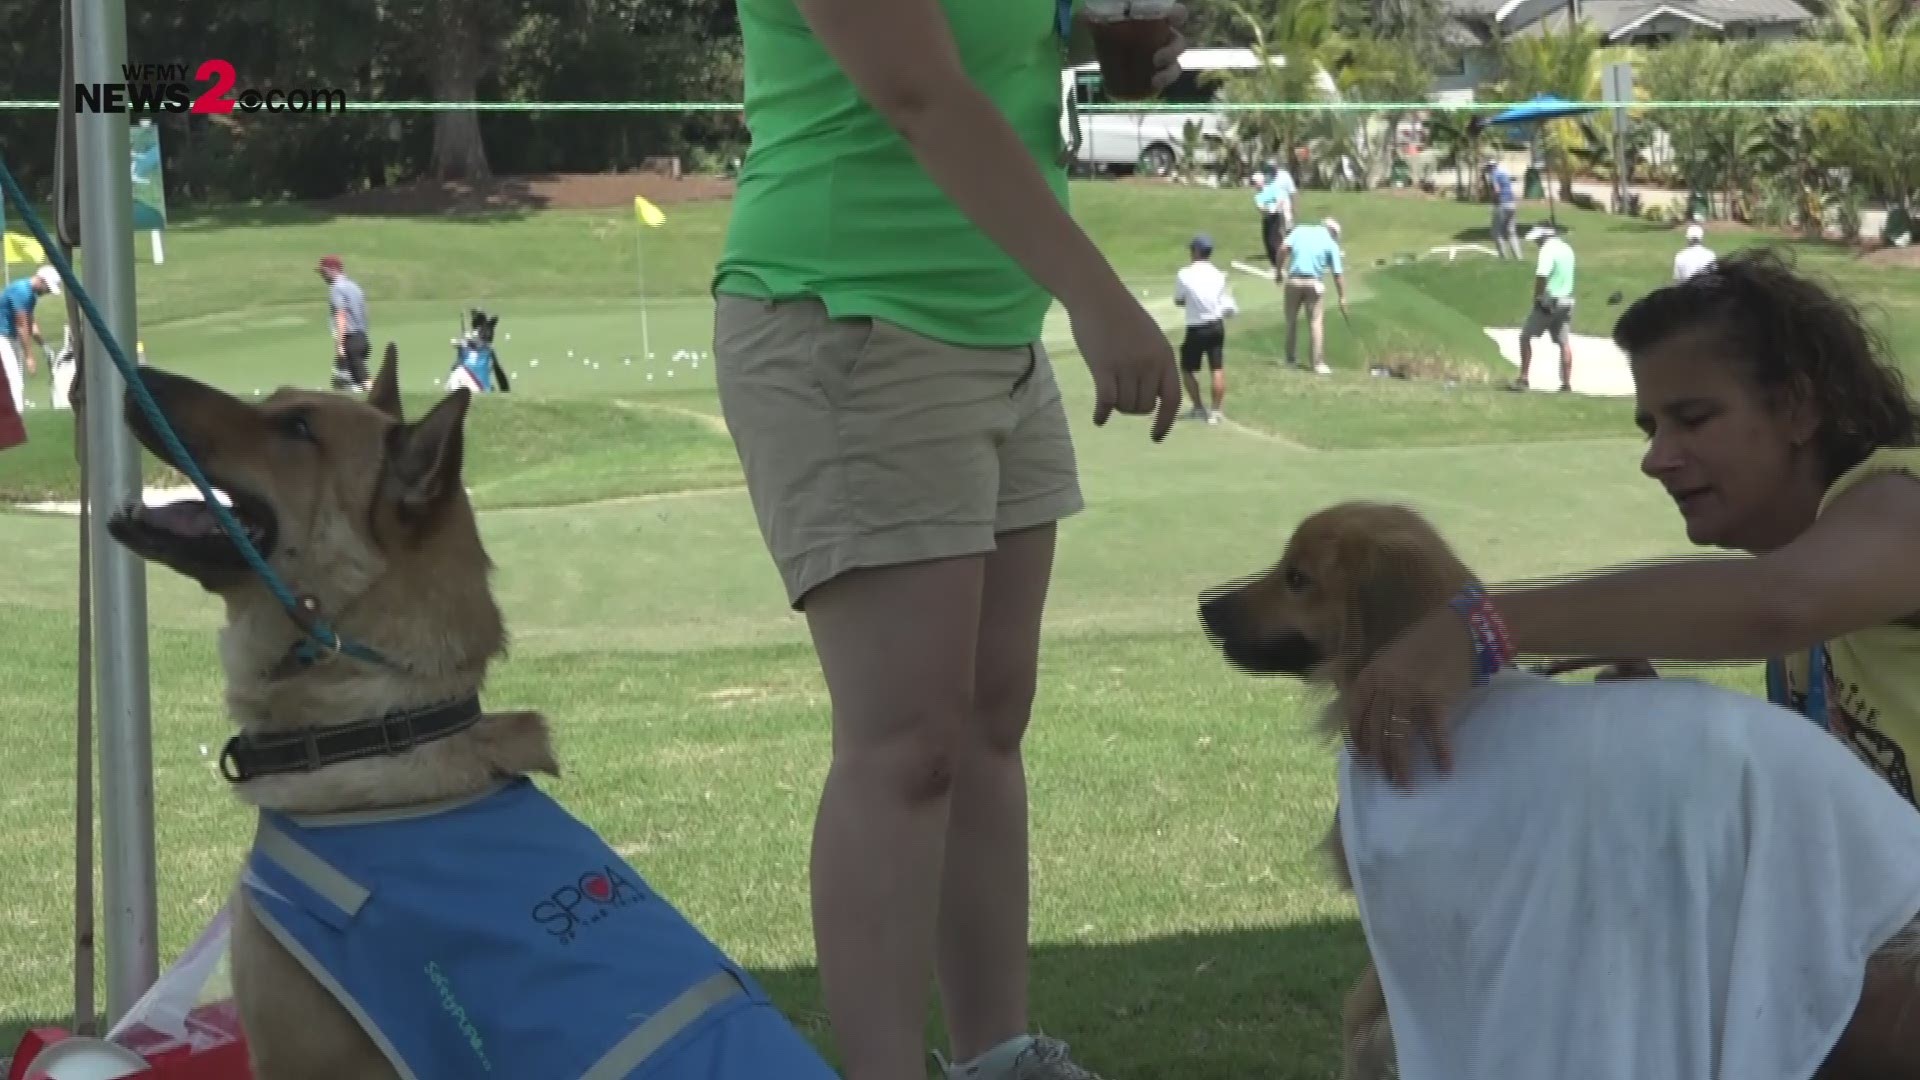 The PGA Tour and the SPCA of the Triad partnered to bring some attention to pet adoption with the "Golf Dogs" event on the first Tuesday of the Championship.